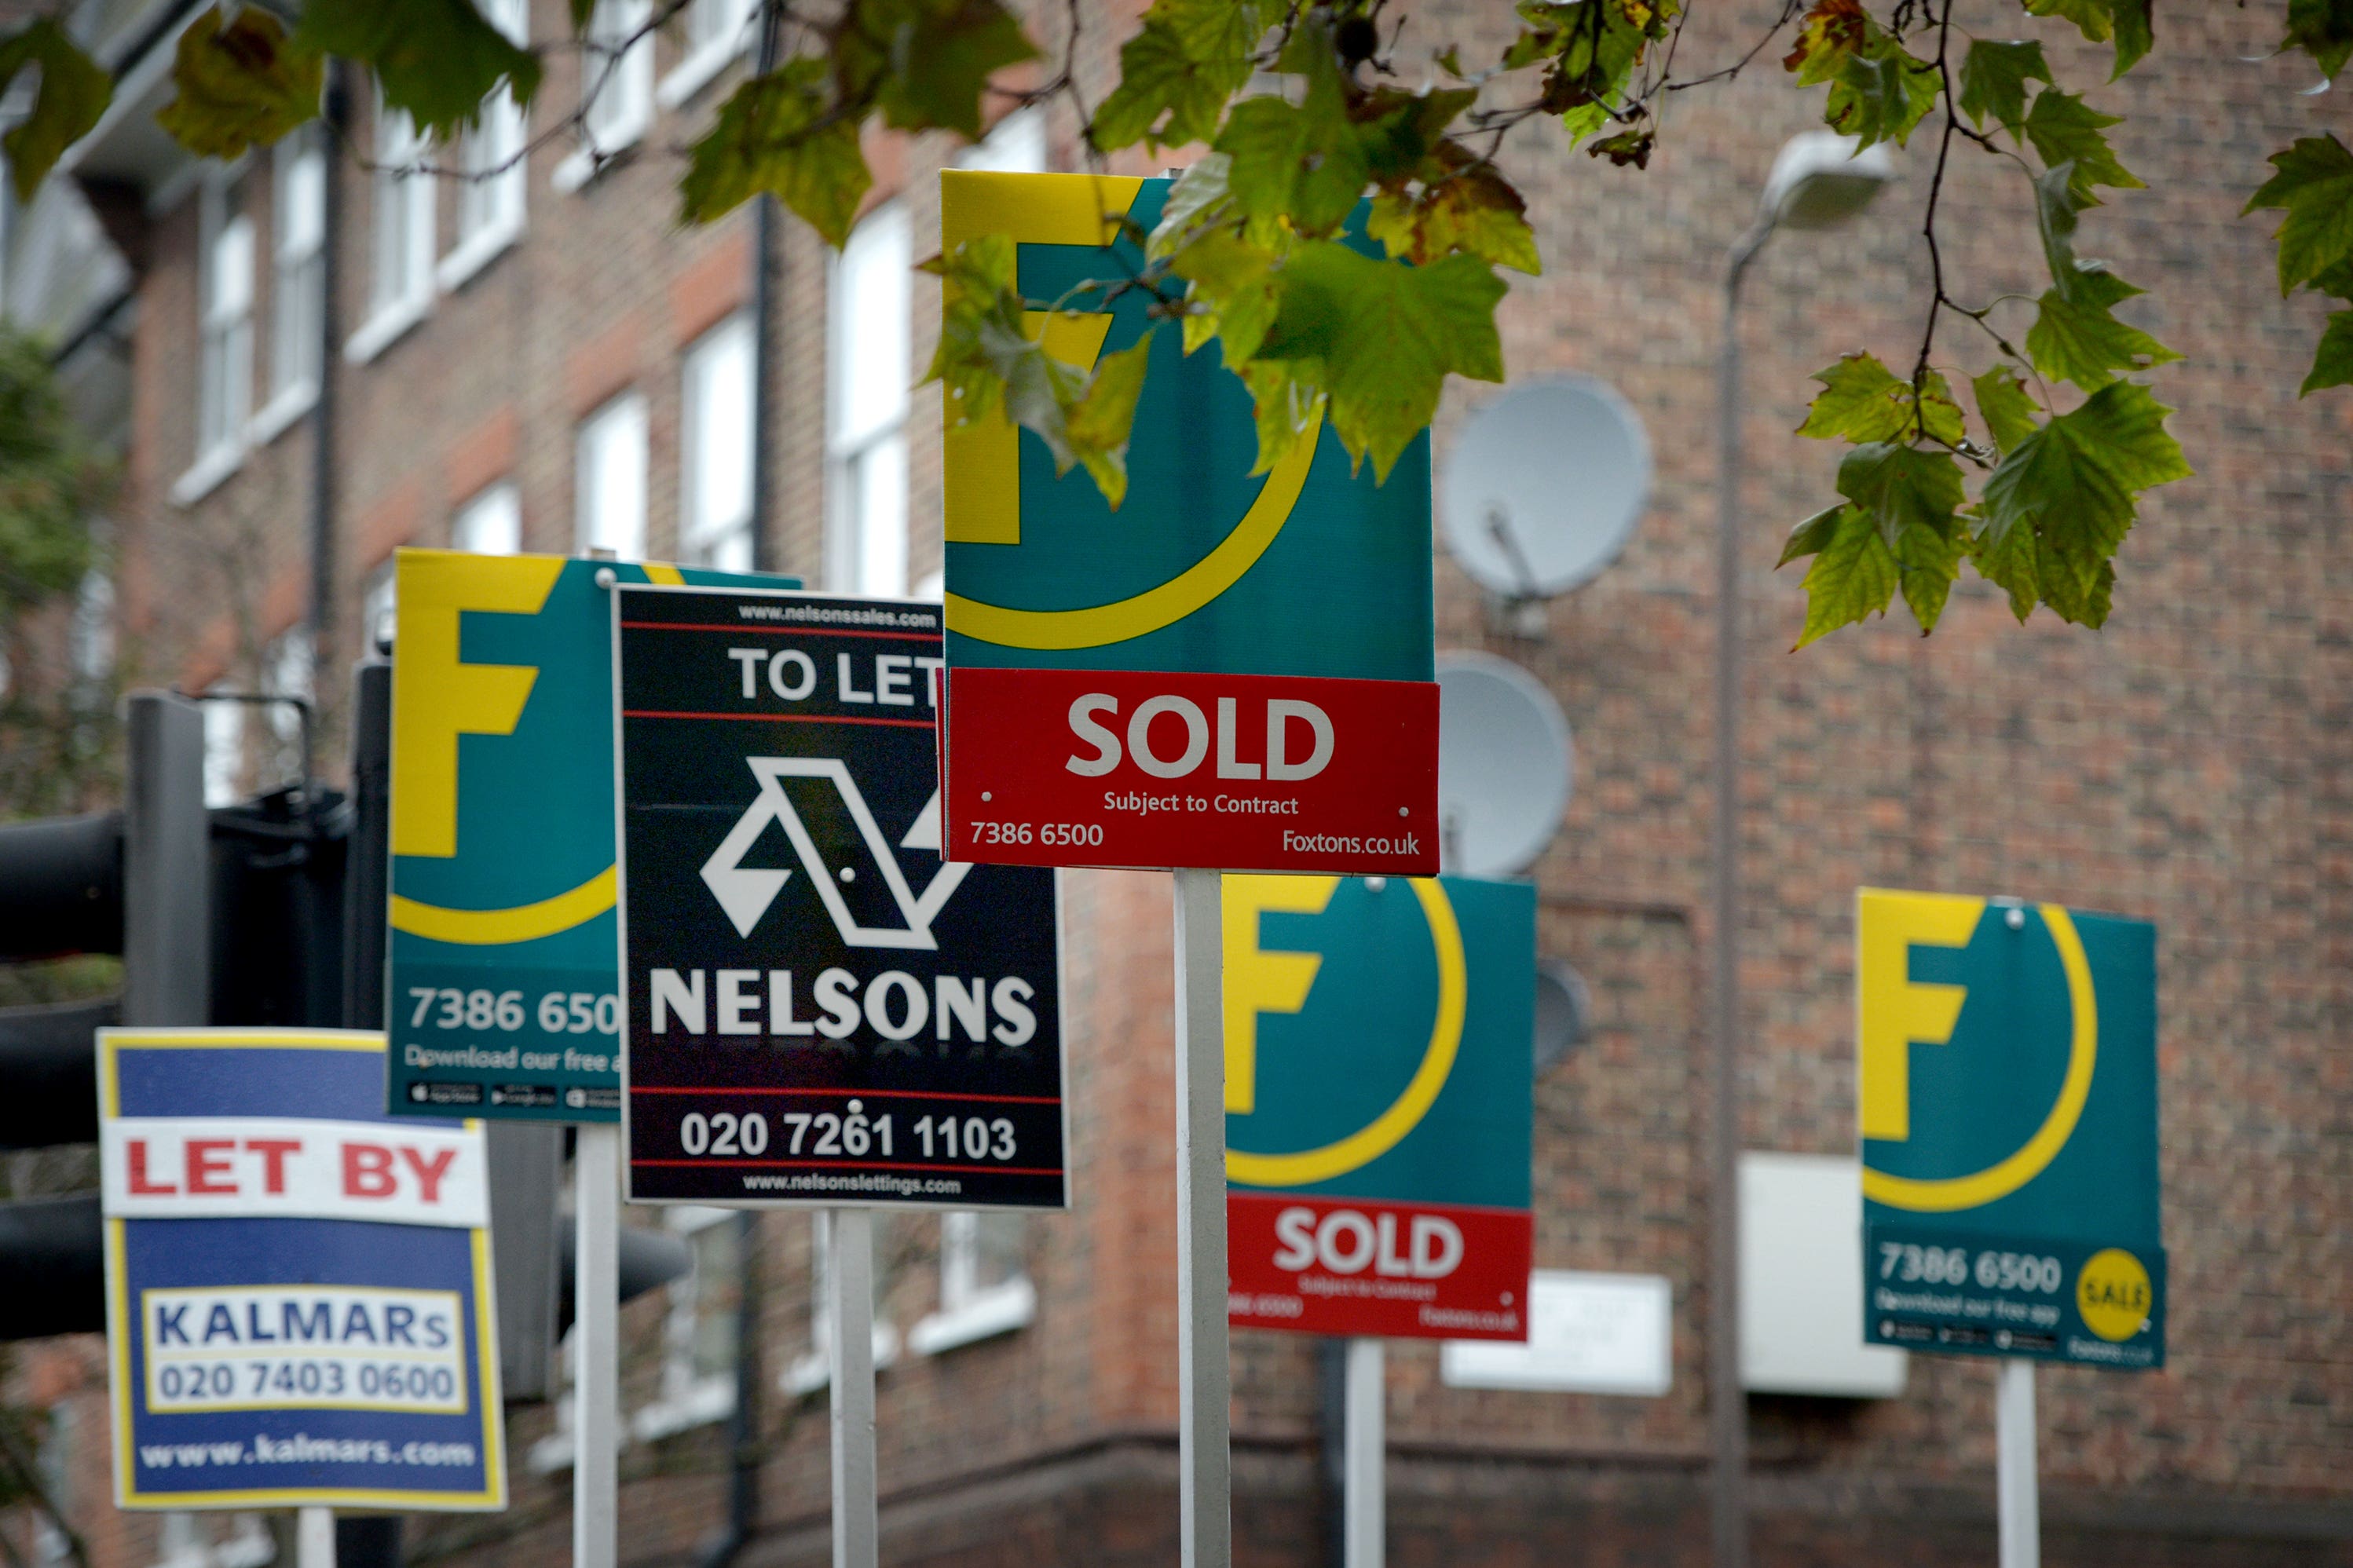 Property website Zoopla said this week that it expects house price inflation to remain muted (Anthony Devlin/PA)